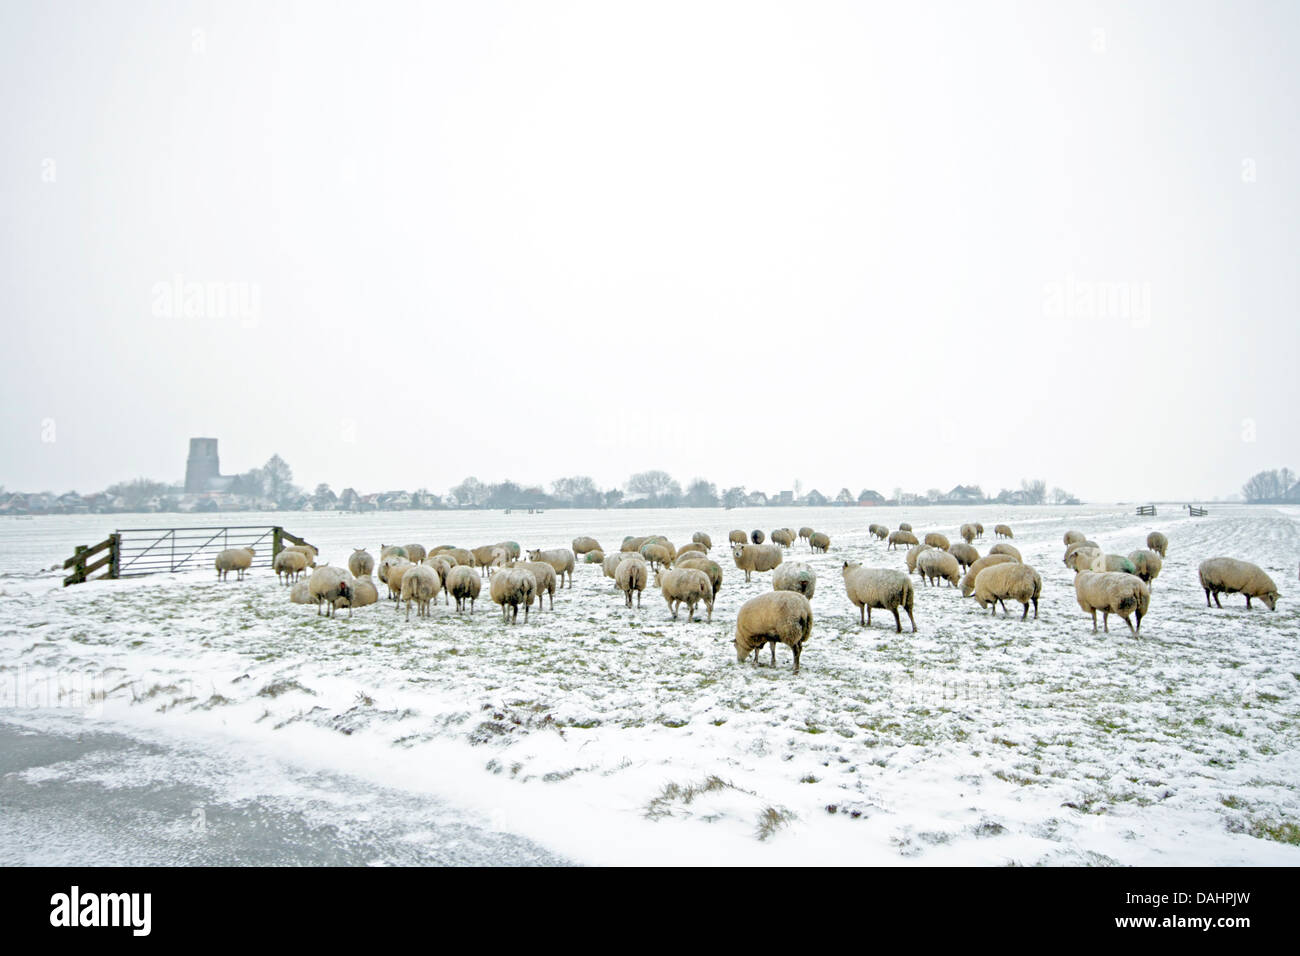 Sheep in the countryside from the Netherlands in winter Stock Photo